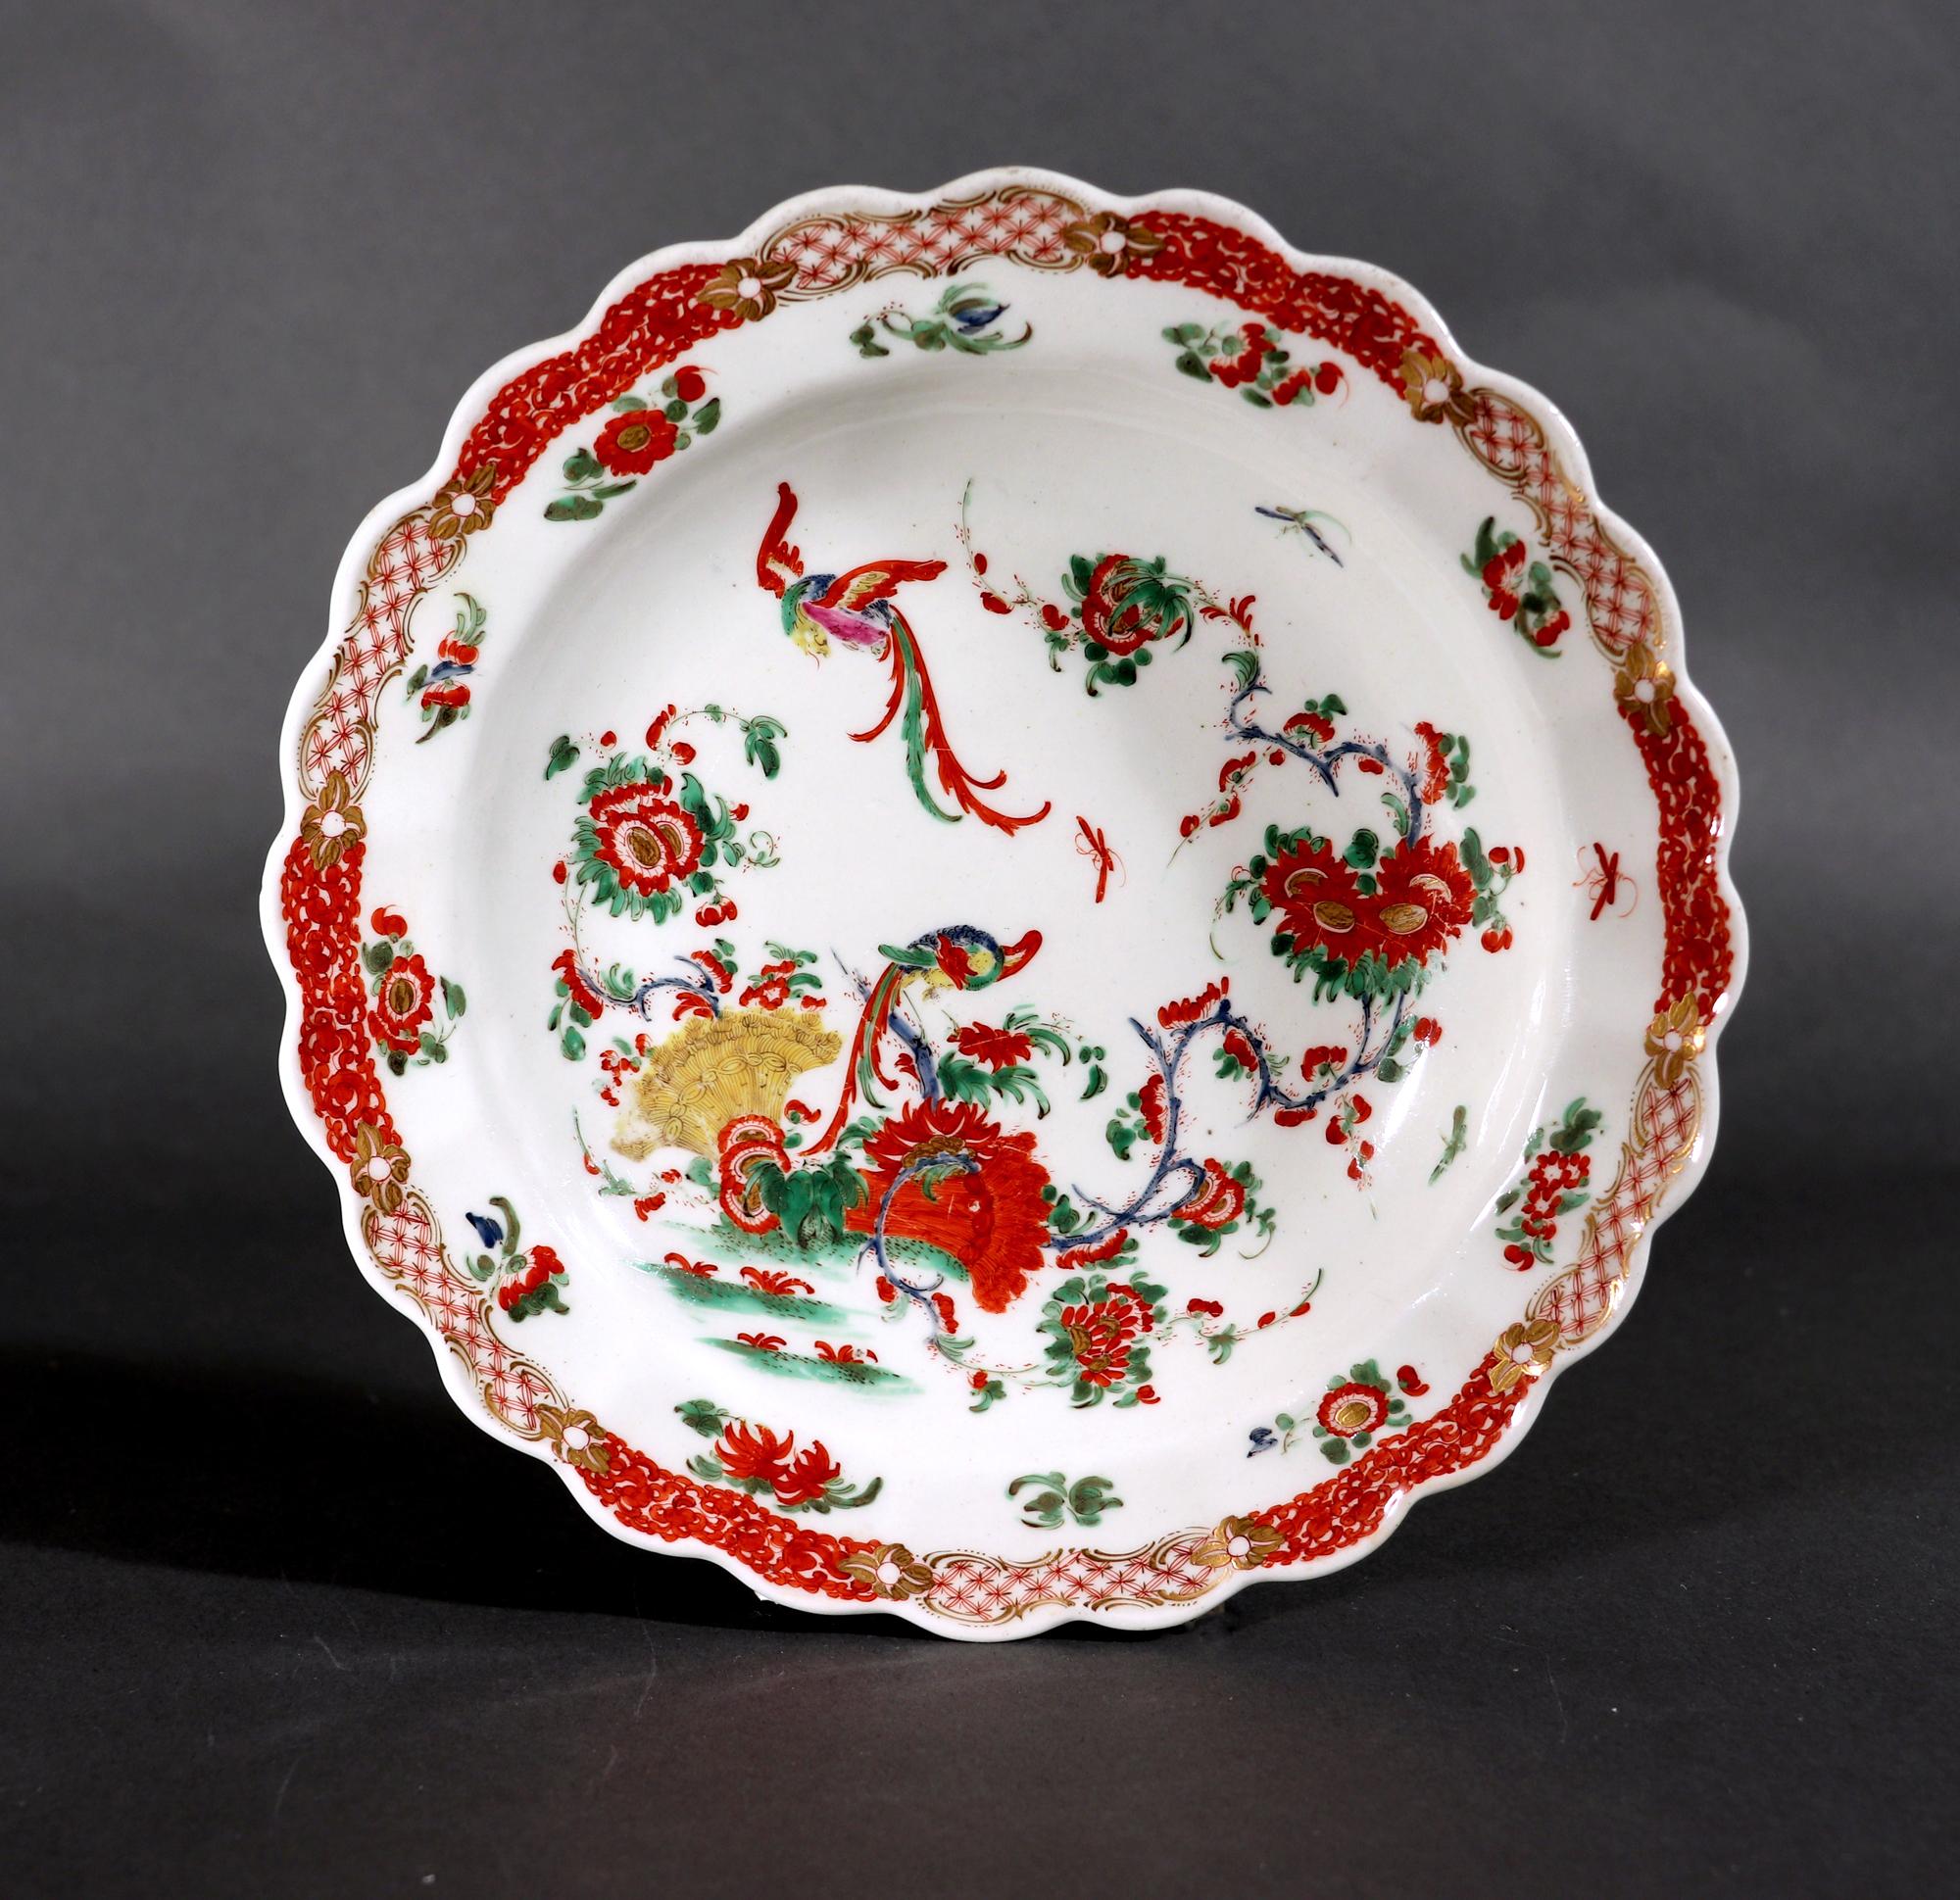 First Period Worcester Porcelain Phoenix Pattern Dessert Plate, 
Circa 1770

The First Period Worcester Porcelain Japan pattern colored dessert plate is painted in the Kakiemon-style colors with two phoenix type birds, one flying above, with